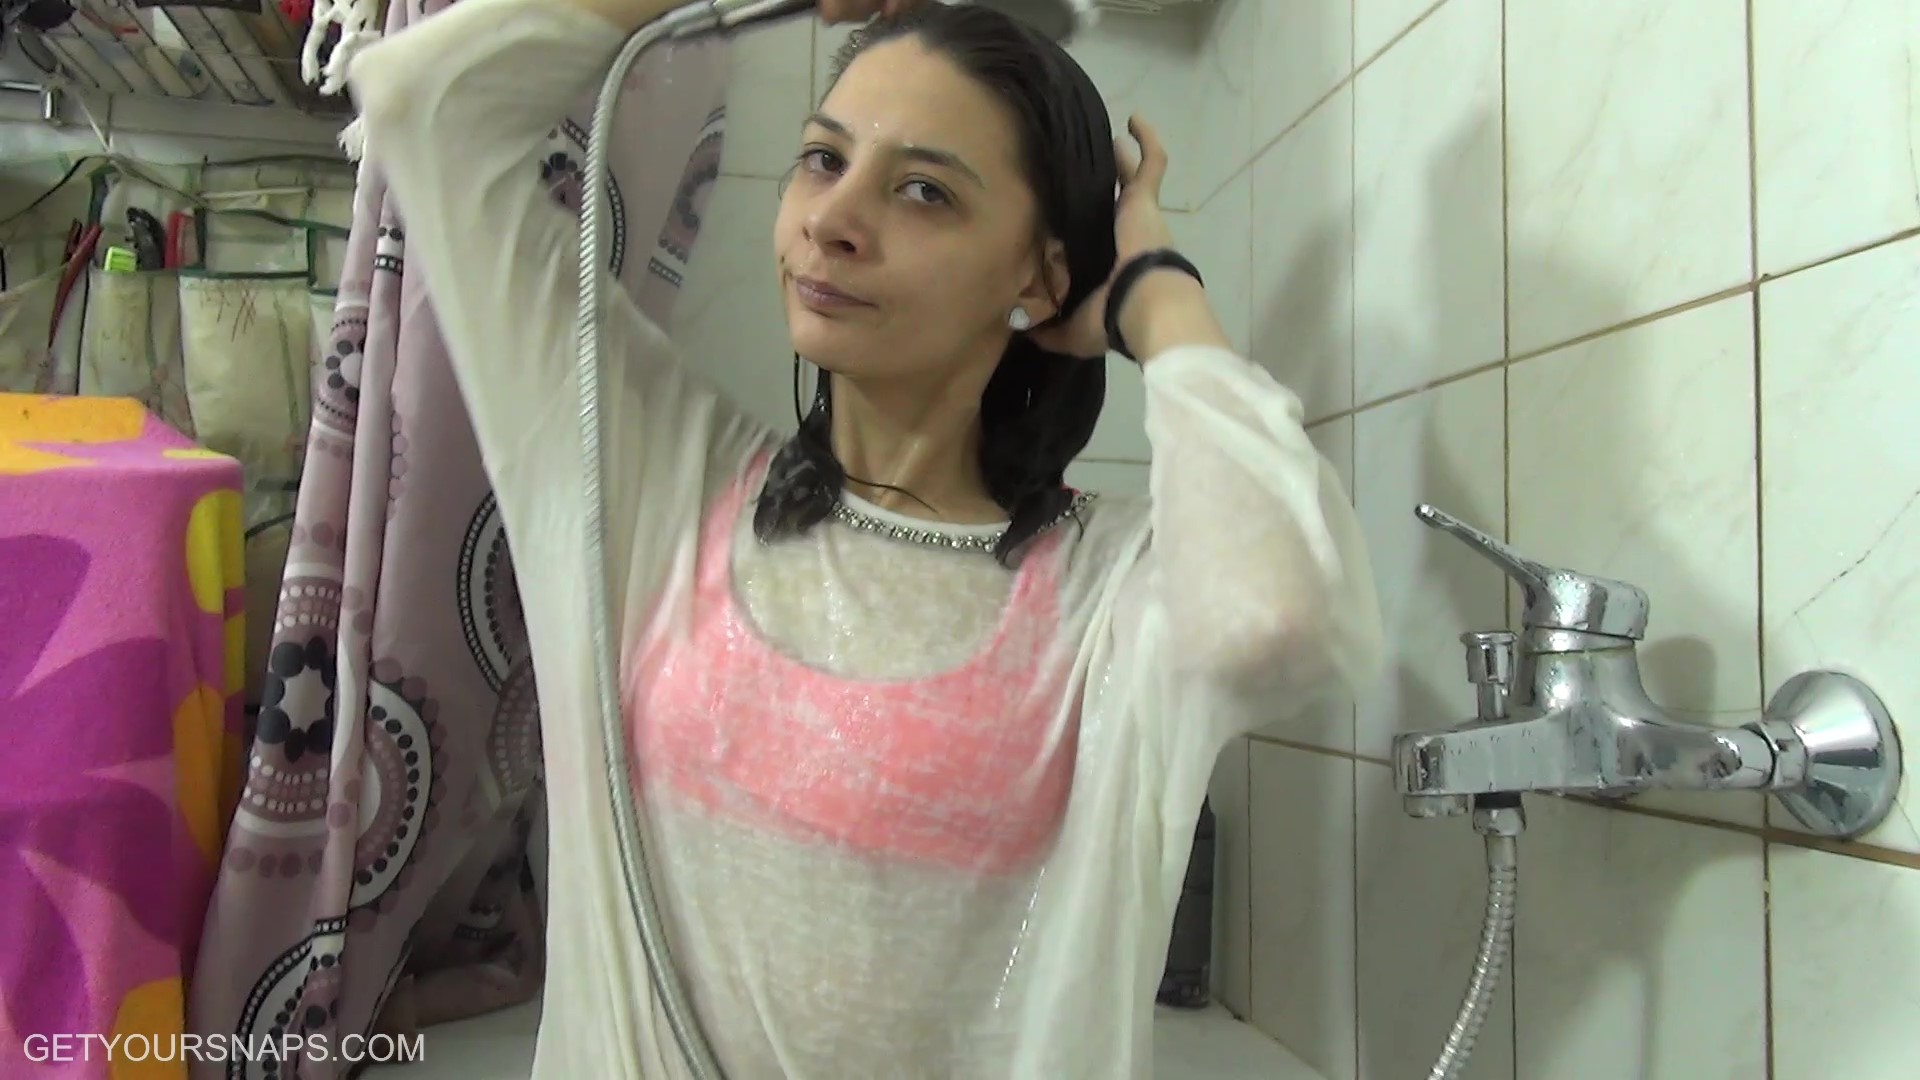 Hot bathtub video from Mina - frame at 4m43s